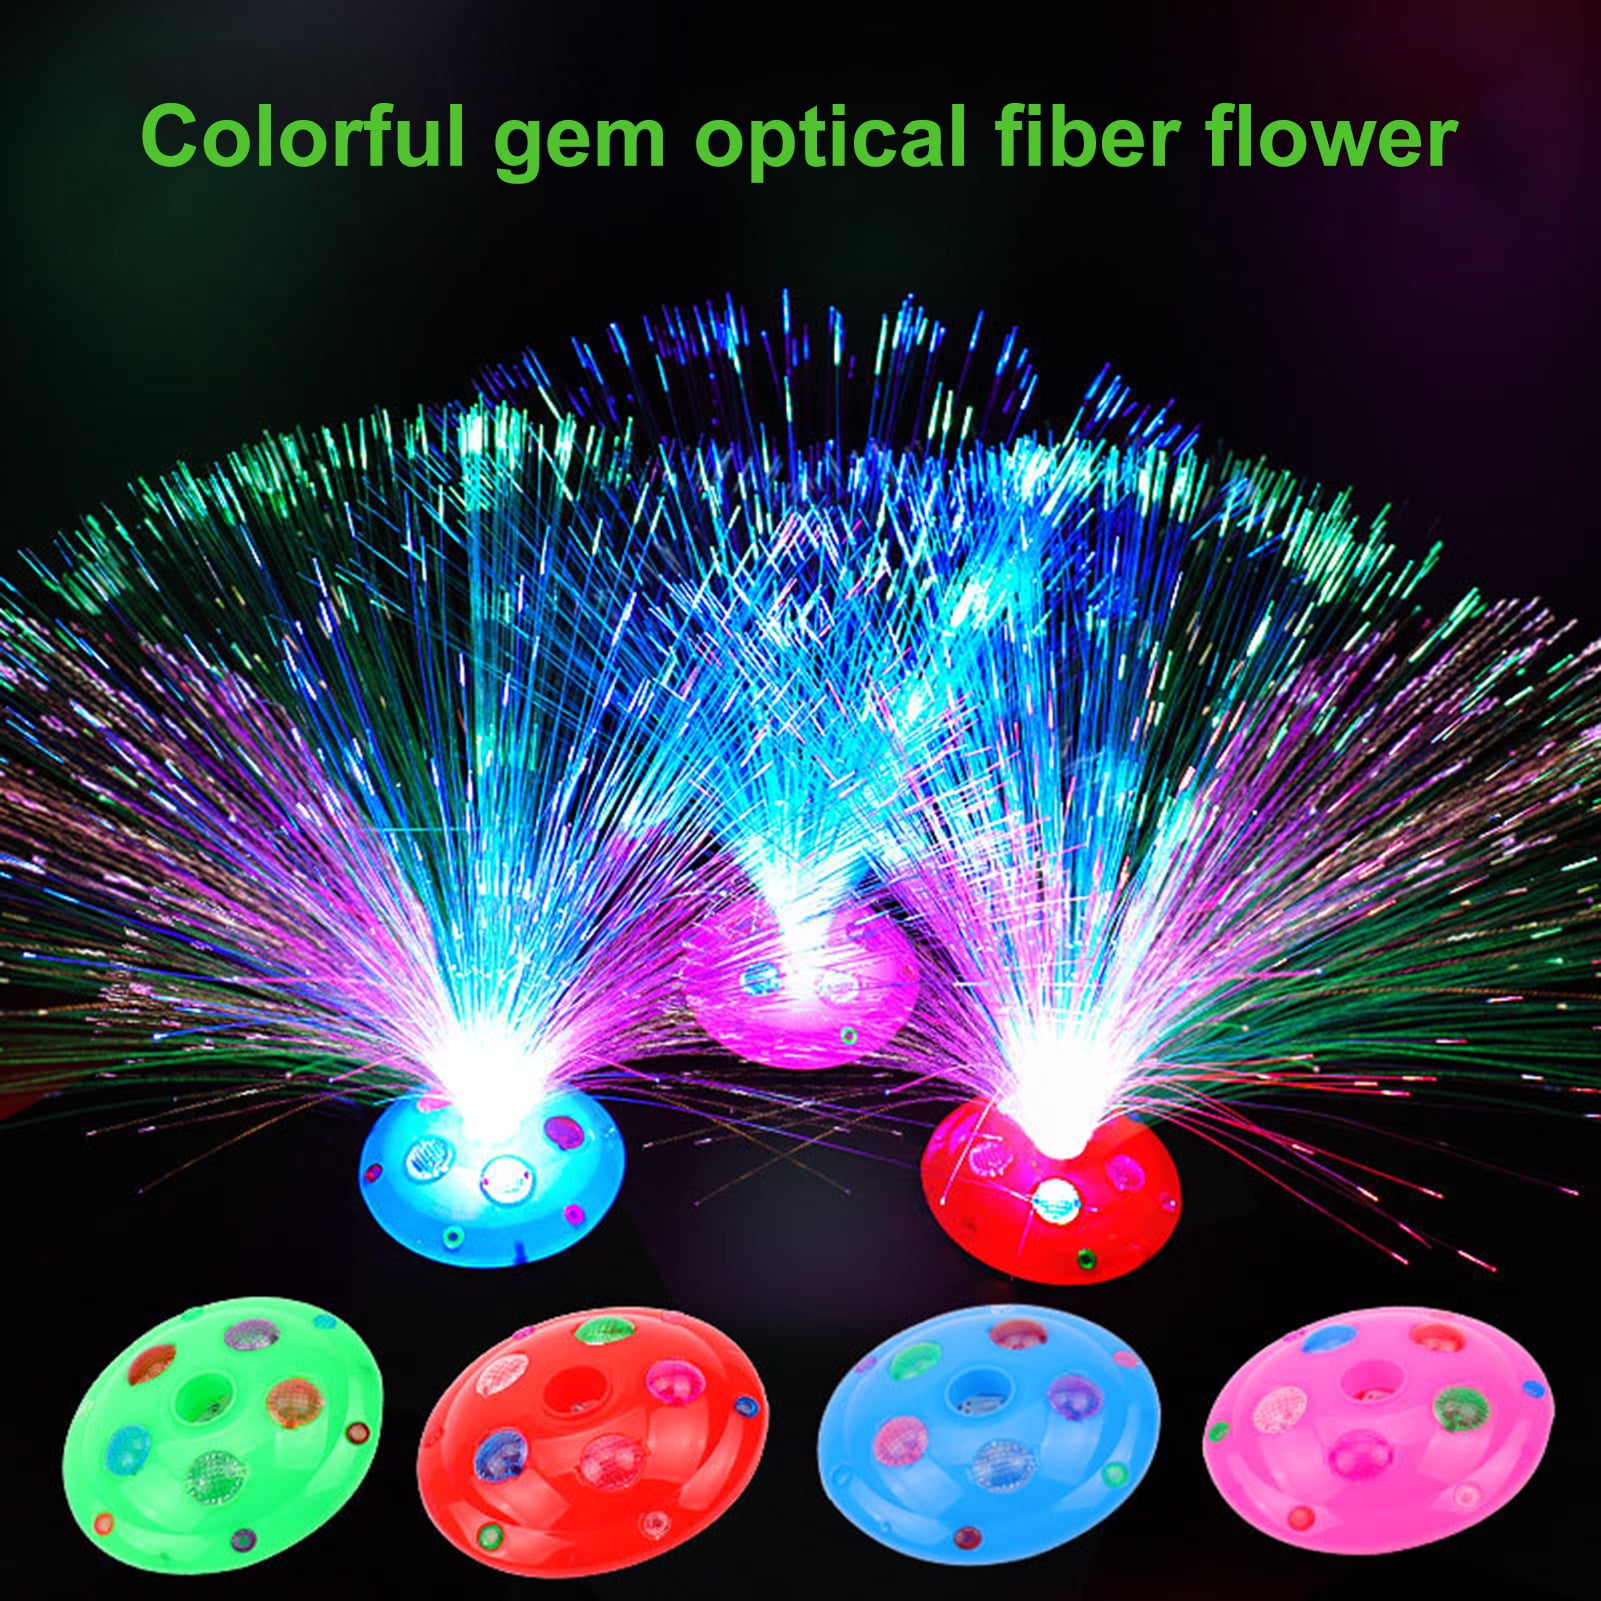 MULTI-COLOR FIBER OPTIC MOHAWK HEADBAND BATTERIES INCLUDED GREAT PARTY GAG GIFT 